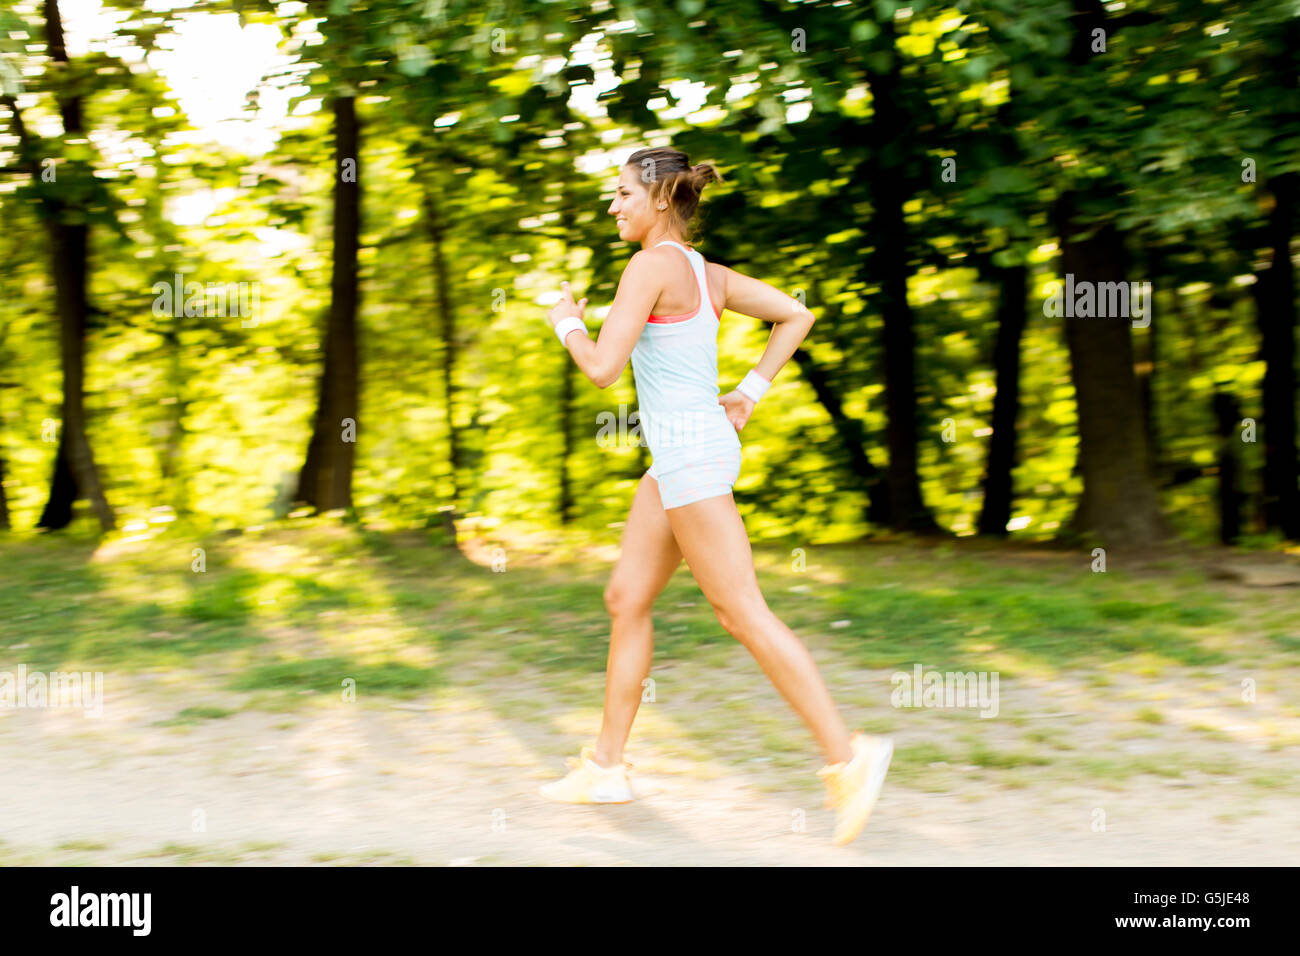 Beautiful Girl Jogging In The Park. Looking At Camera. Stock Photo